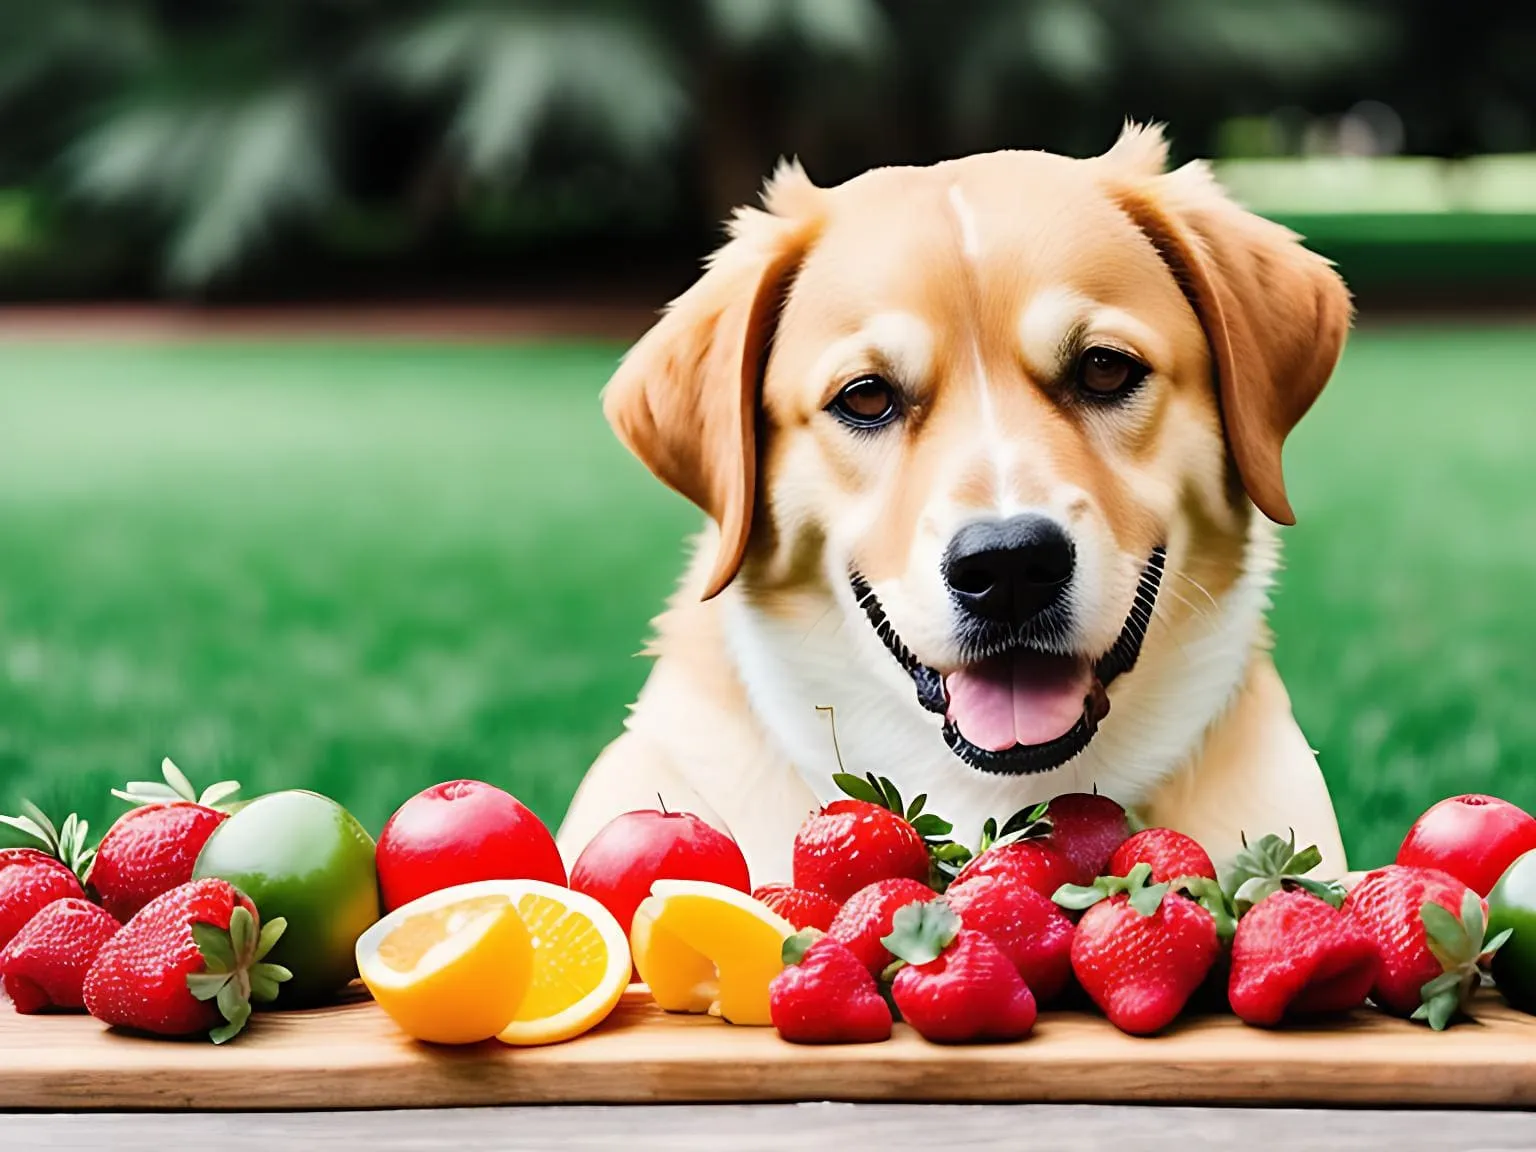 What Fruits Can Dogs Eat | 8 Healh Benefits, Risks, Care